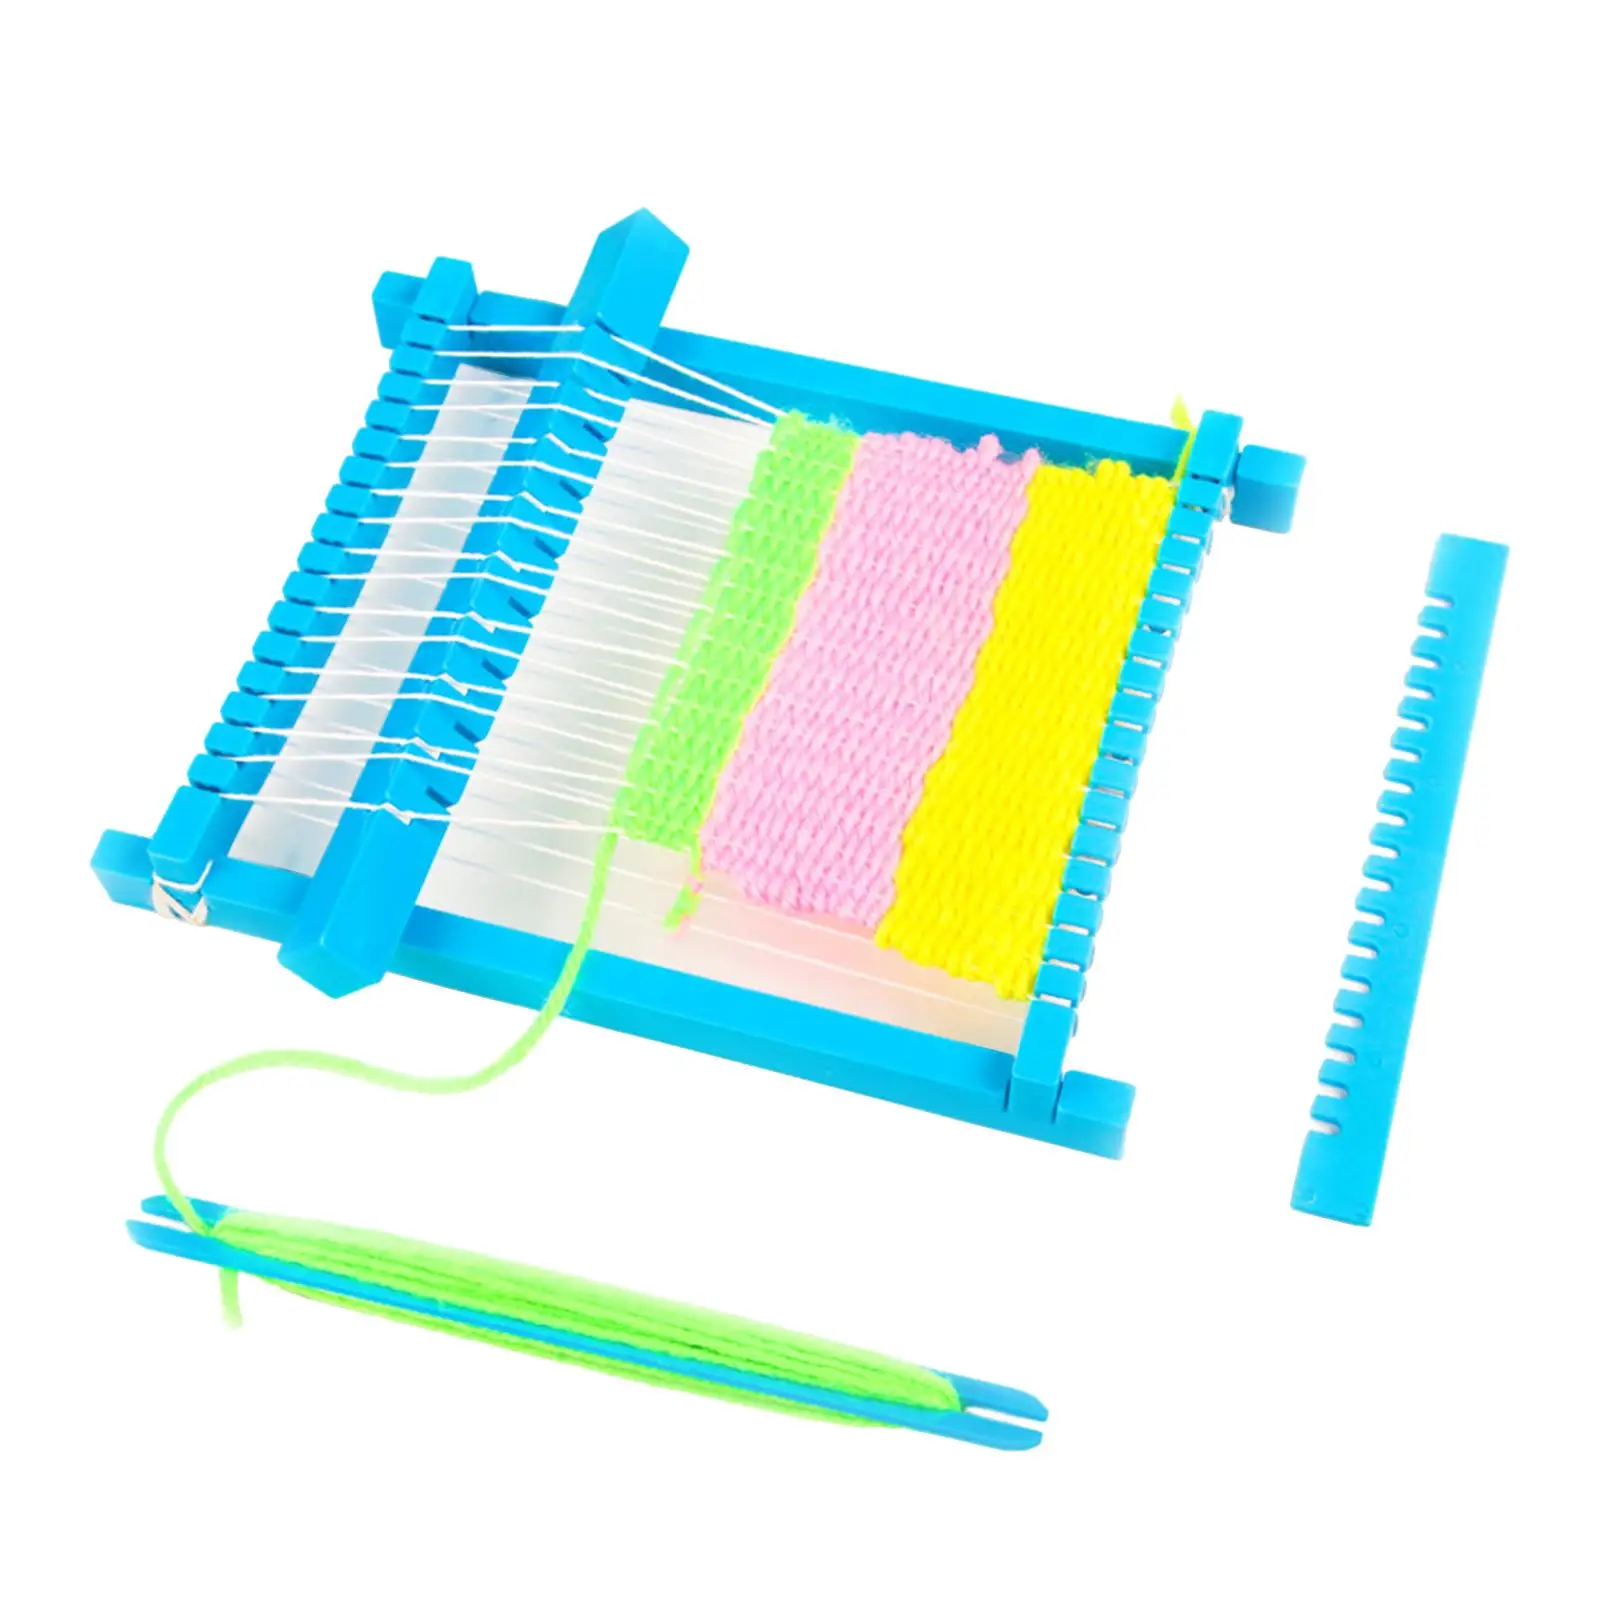 

Weaving Loom Tool with Accs Creative Multifunctional DIY Toy for Beginners Children